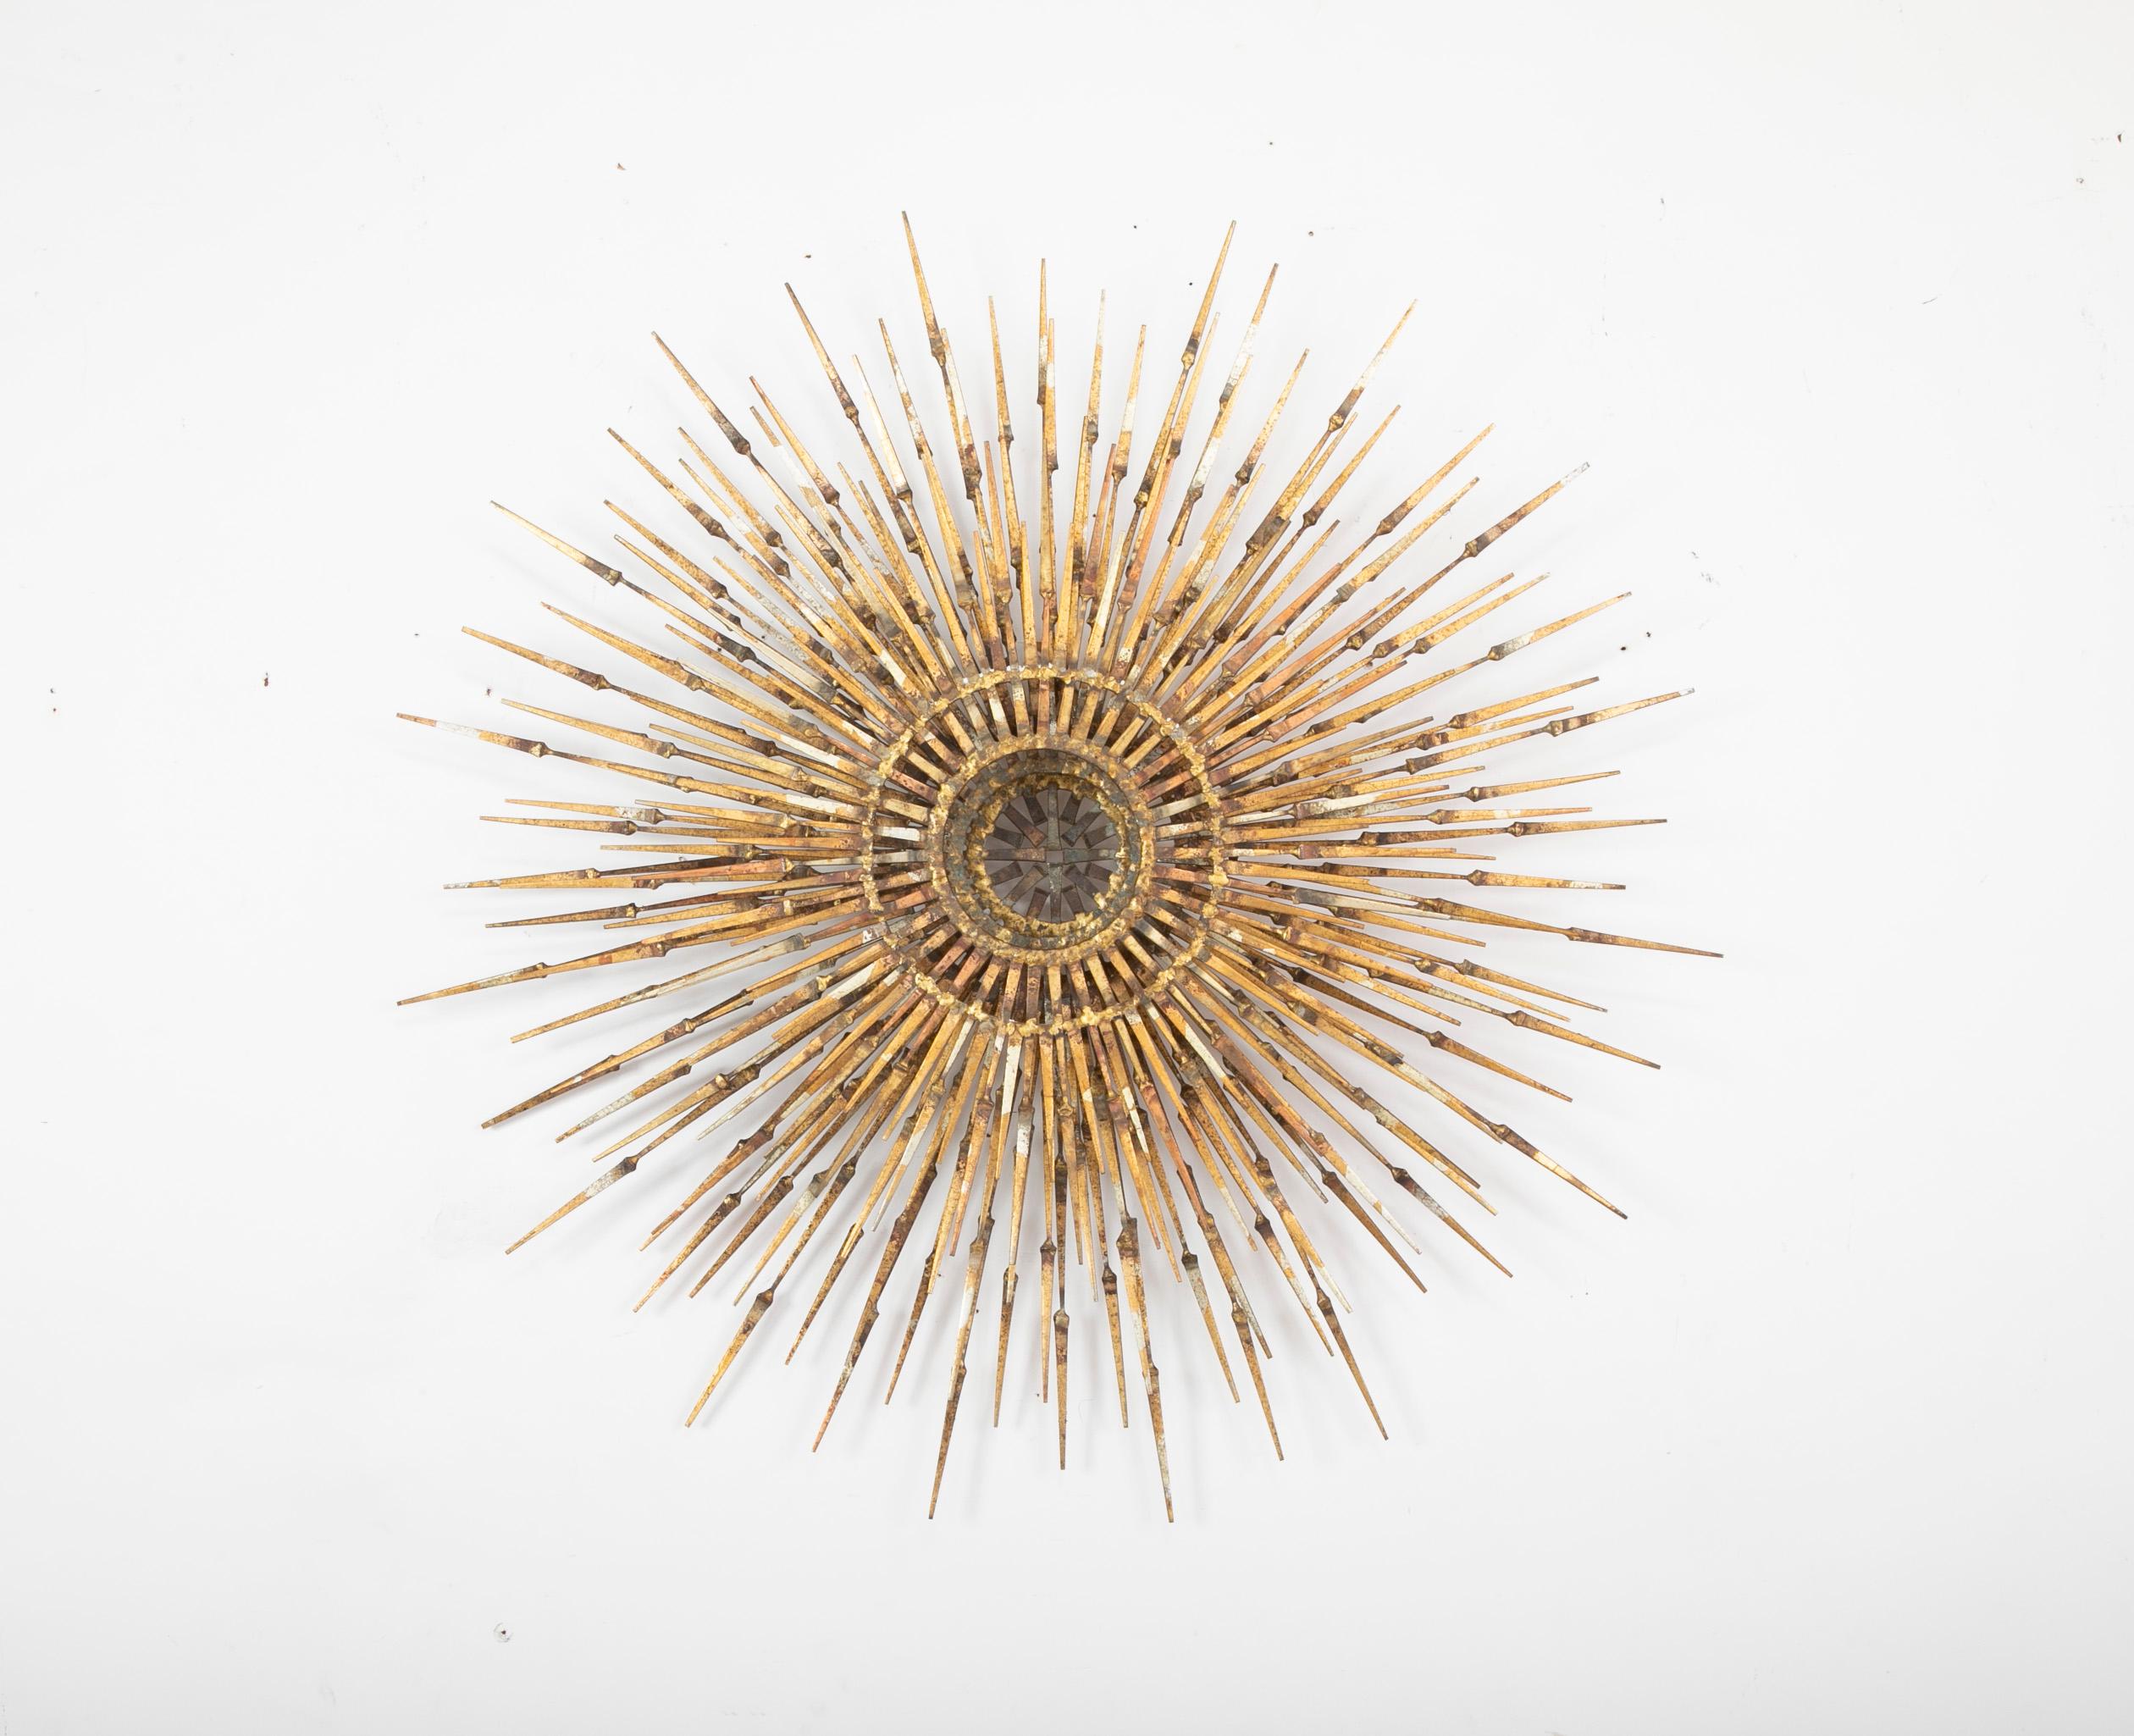 Impressive three tier gilt iron starburst wall mounted sculpture in the Brutalist style. Likely created by William Bowie, American circa 1970, though unsigned. Truly a living piece of sculpture, a Nova exploding perpetually on your wall.
Check out